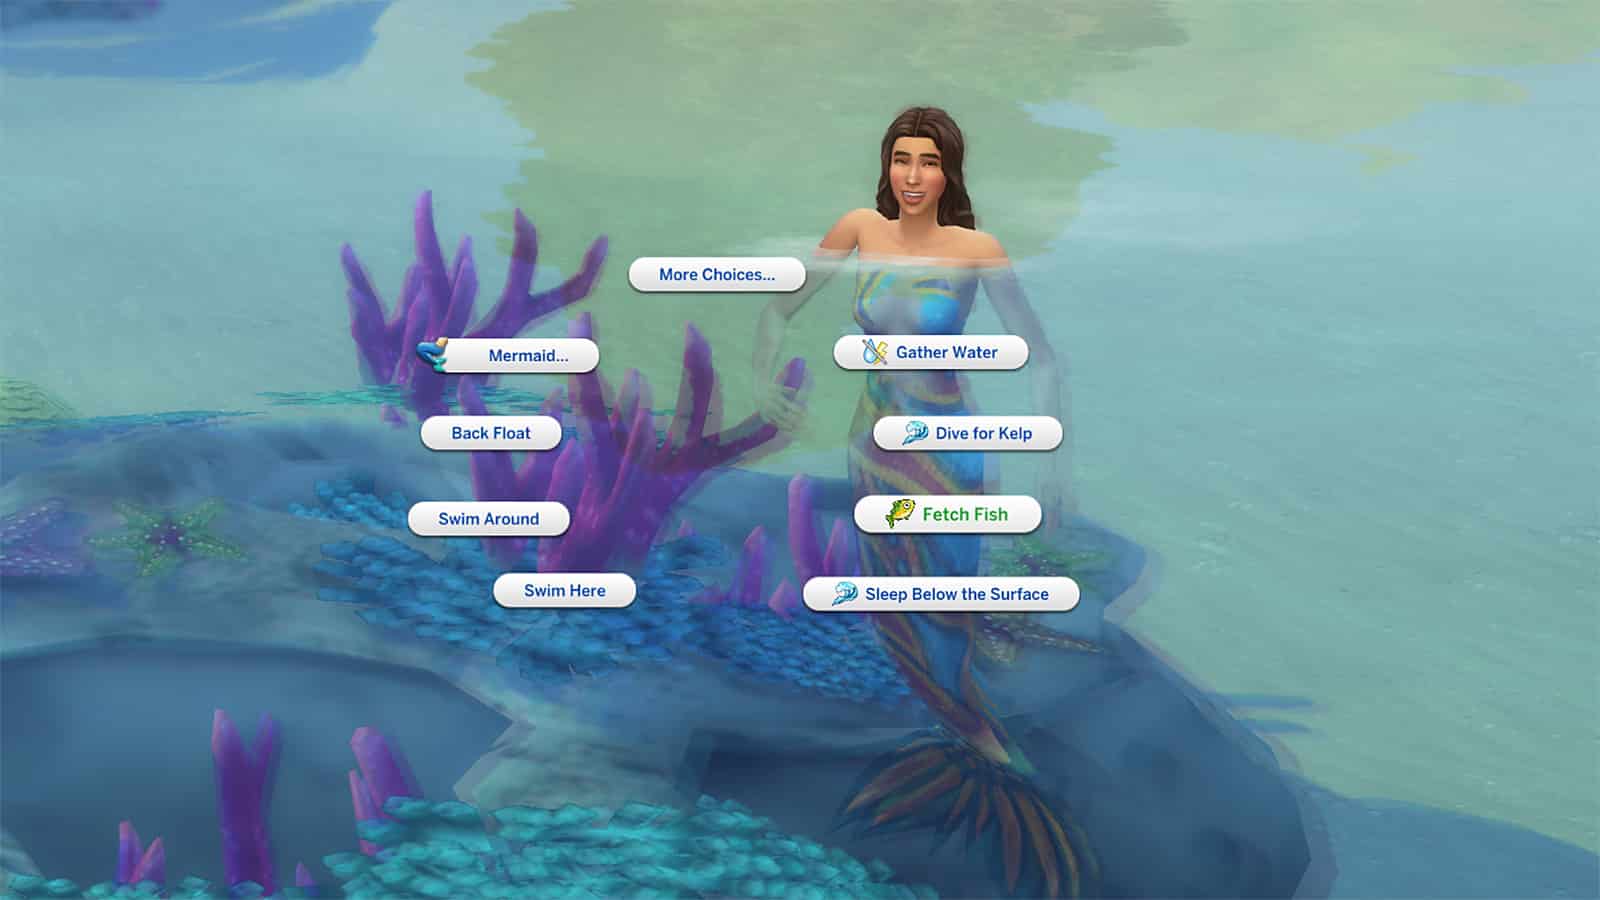 Get Rich Quick: How To Get Maximum Simoleons with The Sims 4 Money Cheat - Cheat  Code Central